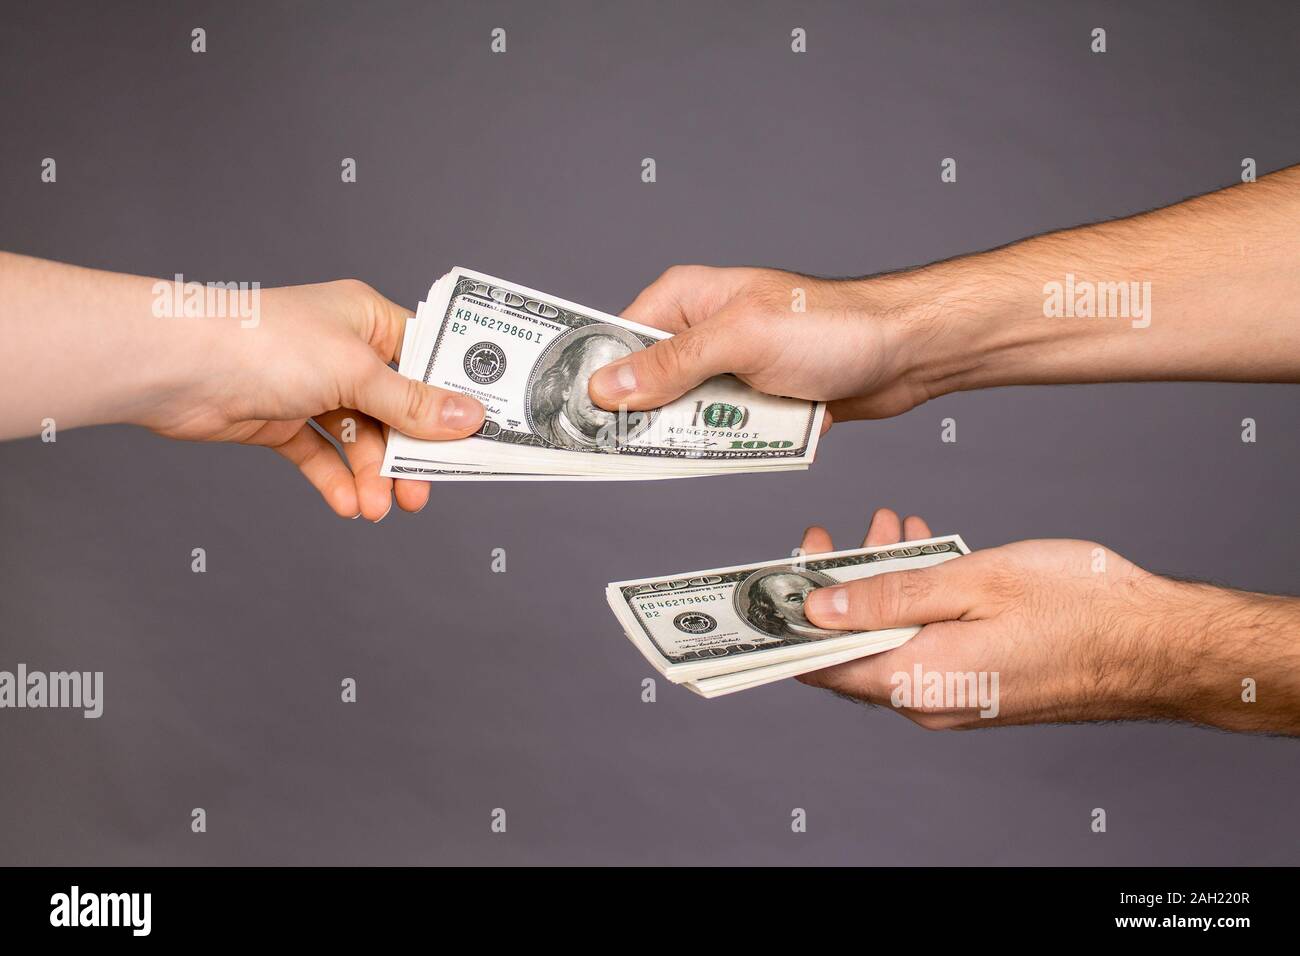 Close up of a guy handing over money for a product or service on a gray background Stock Photo